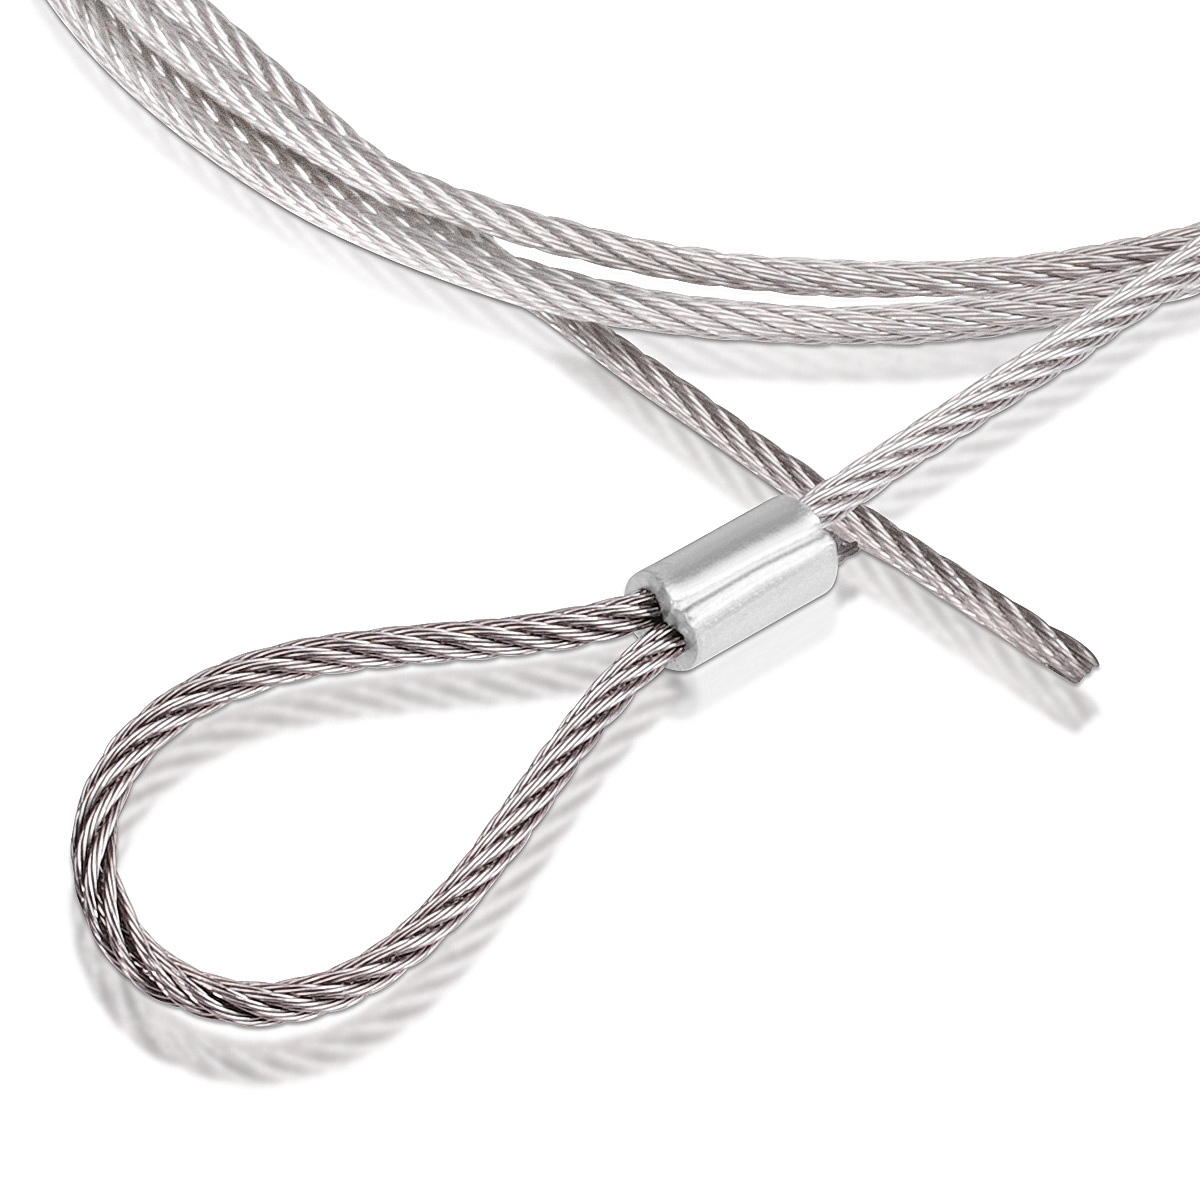 Looped Stainless Steel Cable - 120''